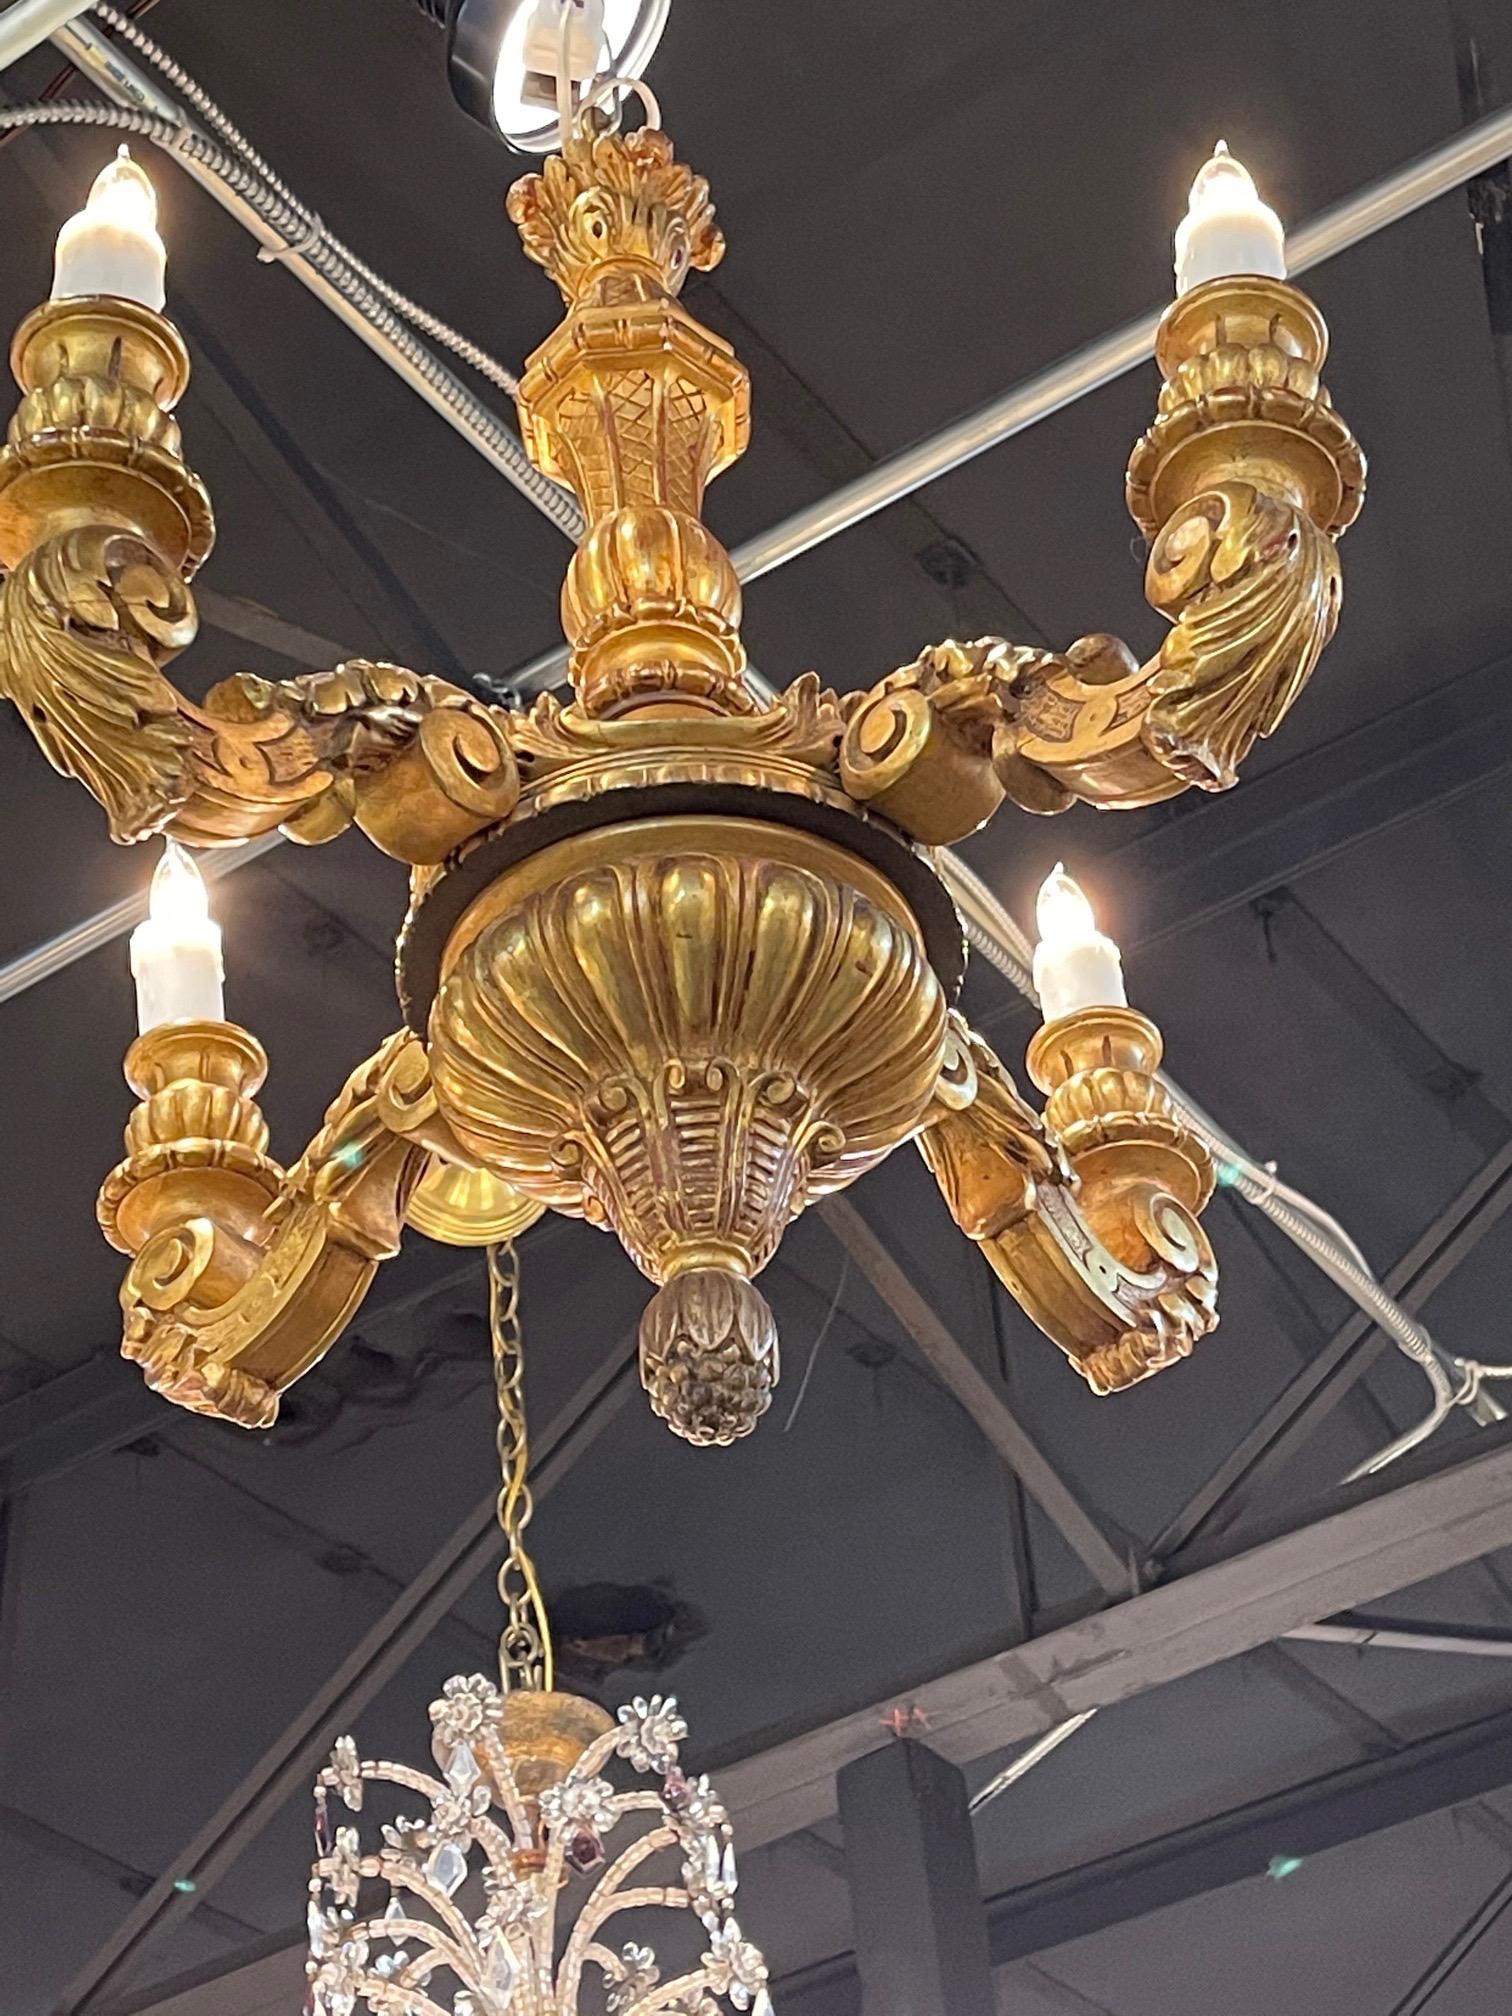 Gorgeous carved and giltwood chandelier with 4 lights. Exceptional carving on this piece. Very fine quality and a true work of art!